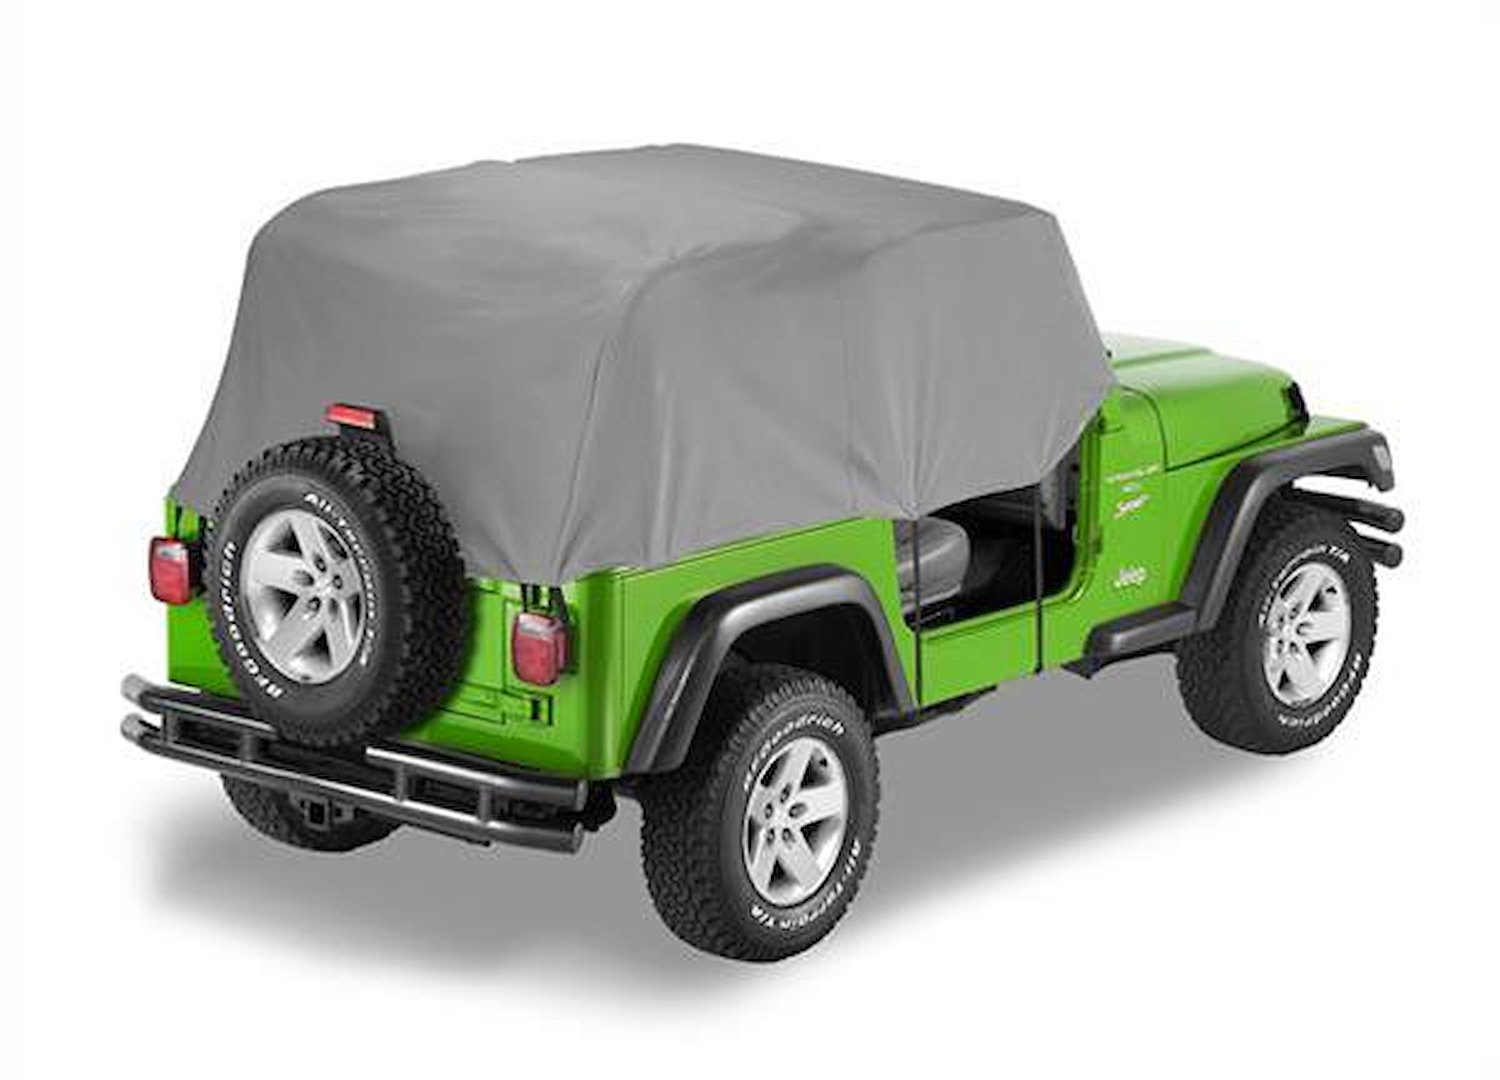 All Weather Trail Cover For Jeep, Charcoal, Incl. Stuff Sack For Storage,